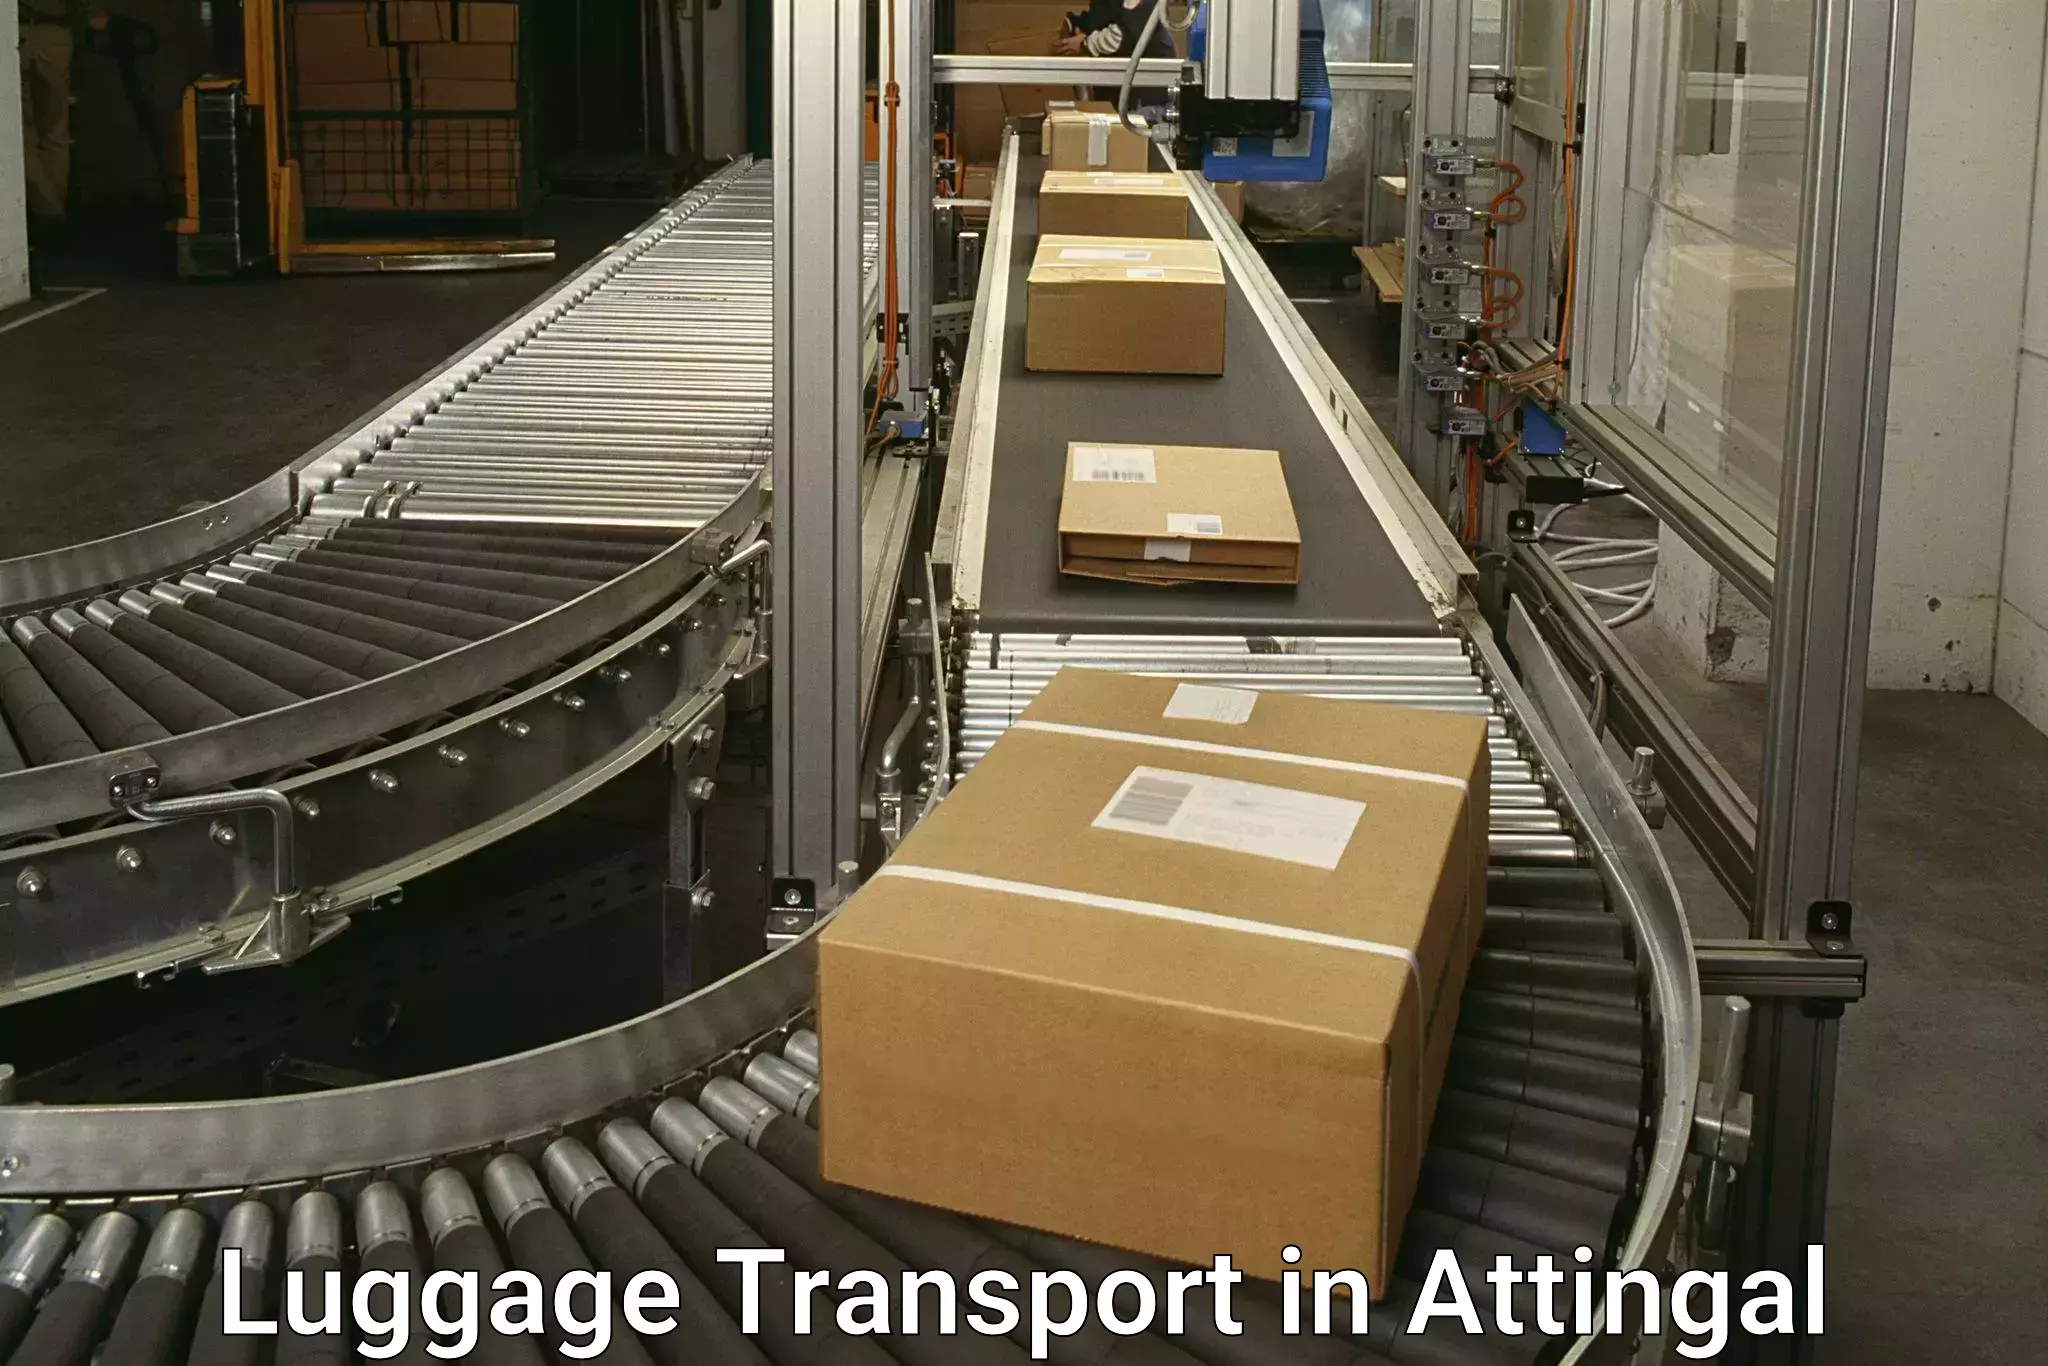 Luggage transport pricing in Attingal